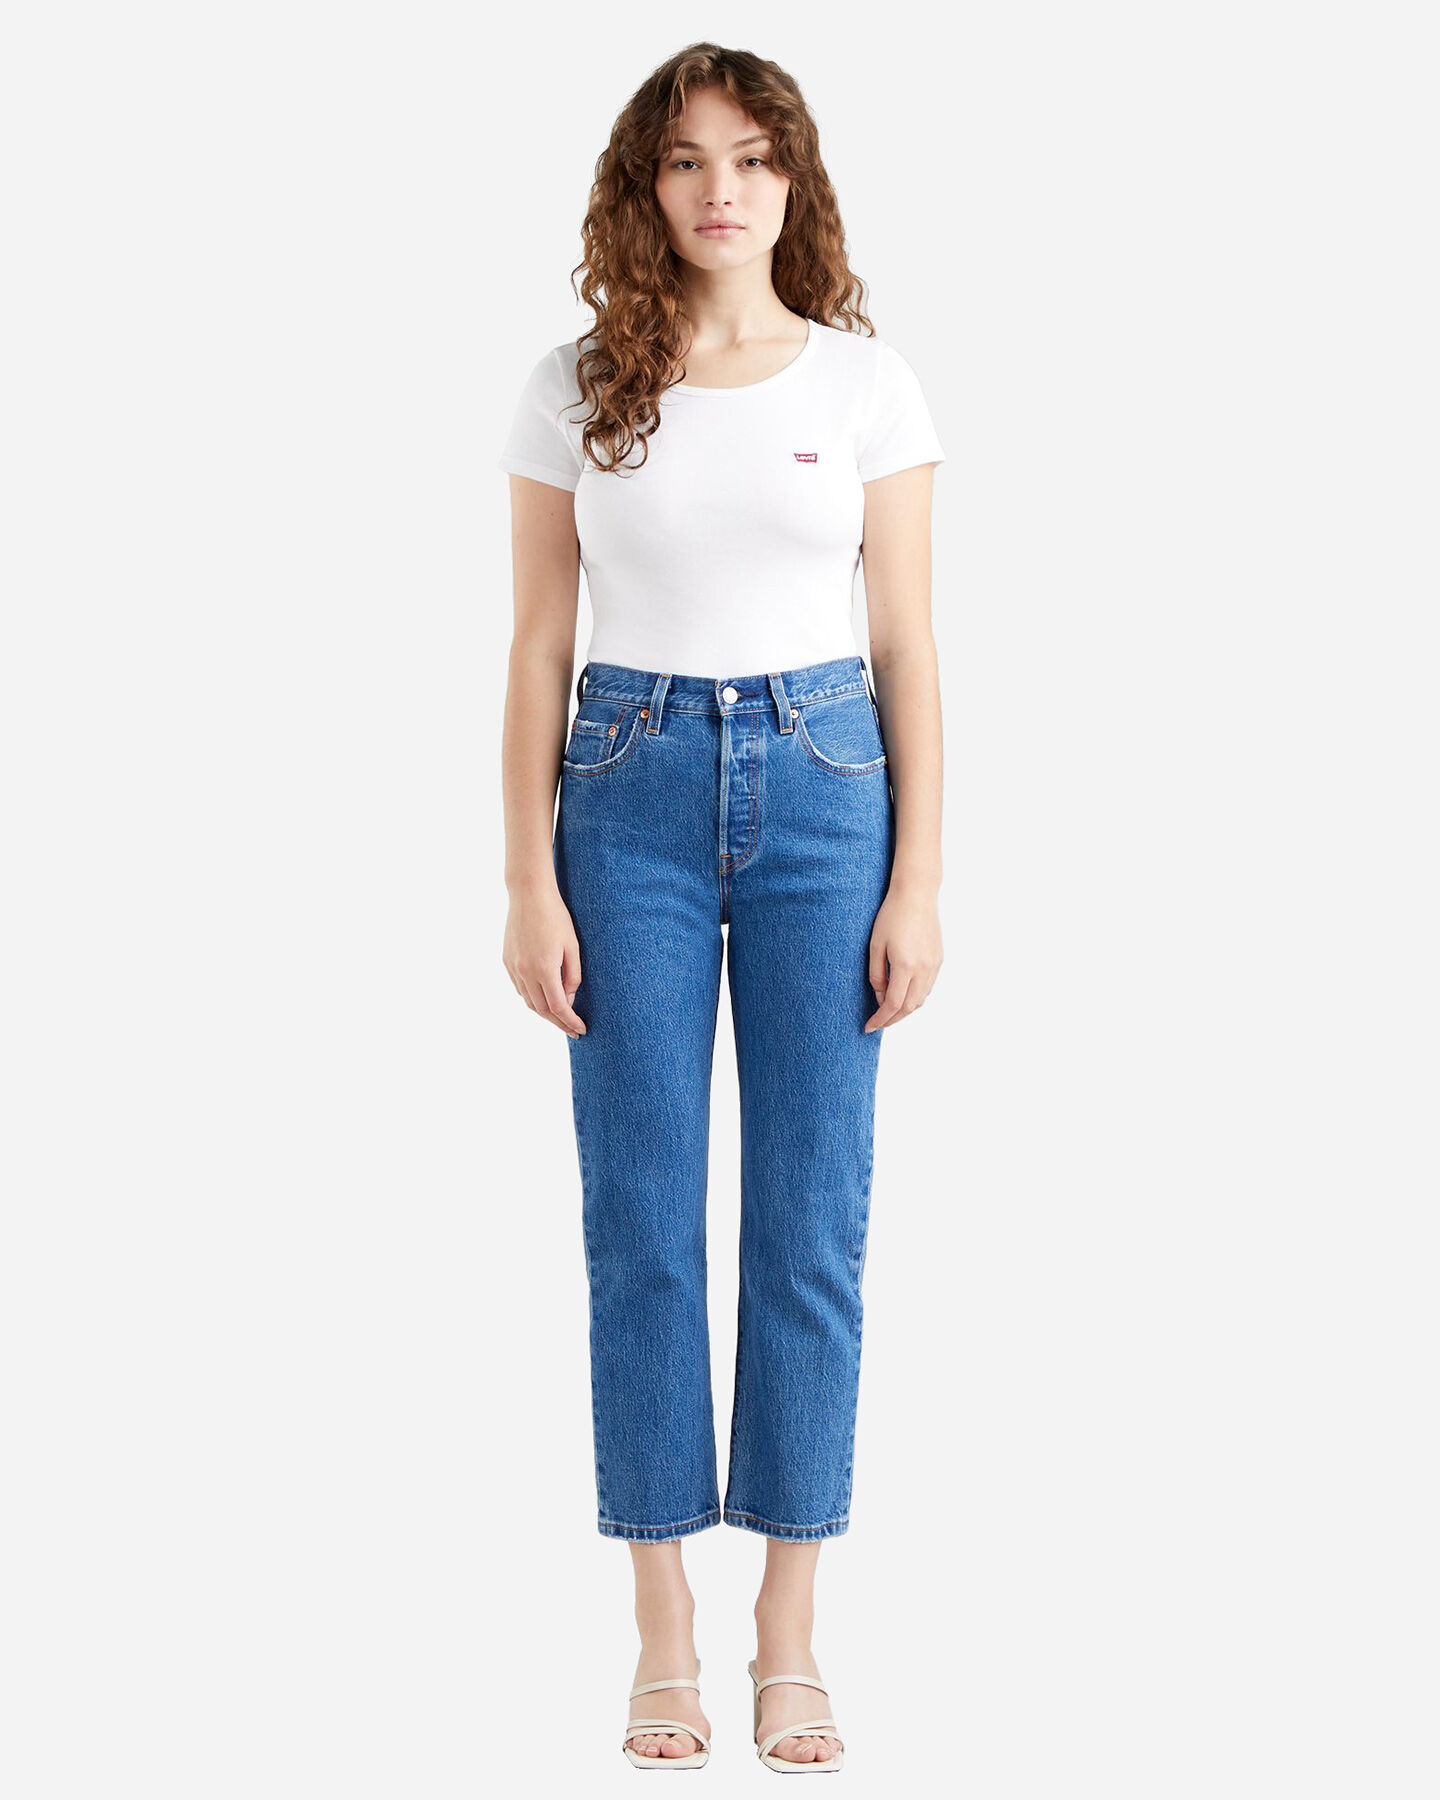  Jeans LEVI'S 501 CROP L28 W S4127913|0225|29 scatto 3